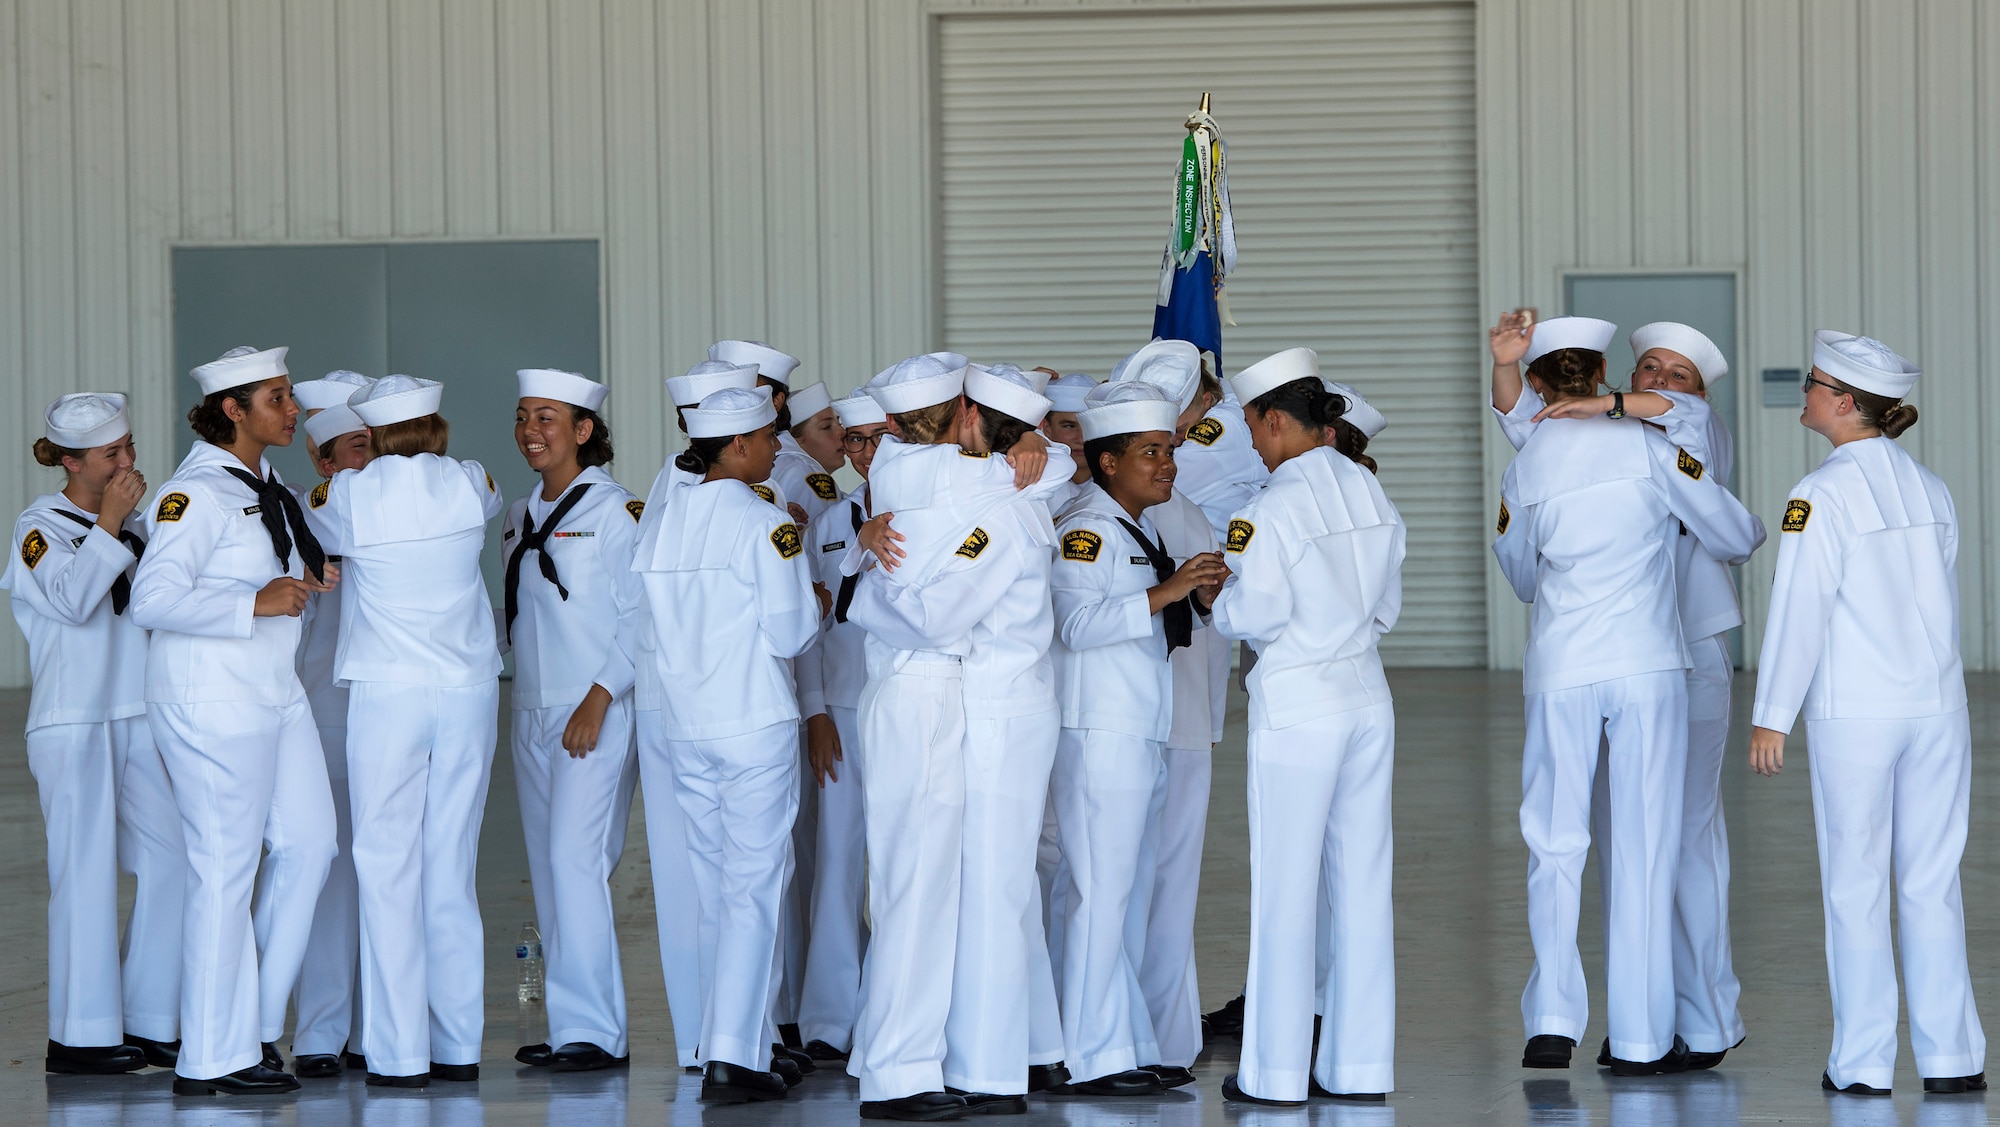 Members of the U.S. Naval Sea Cadet Corps (USNSCC) recruit training flight 1902 celebrate after a graduation ceremony, July 20, 2019, at MacDill Air Force Base, Fla.  The USNSCC recruits received 106 hours of instruction, which focused on the Navy’s core values of honor, courage and commitment. (U.S. Air Force photo by Airman 1st Class Shannon Bowman)